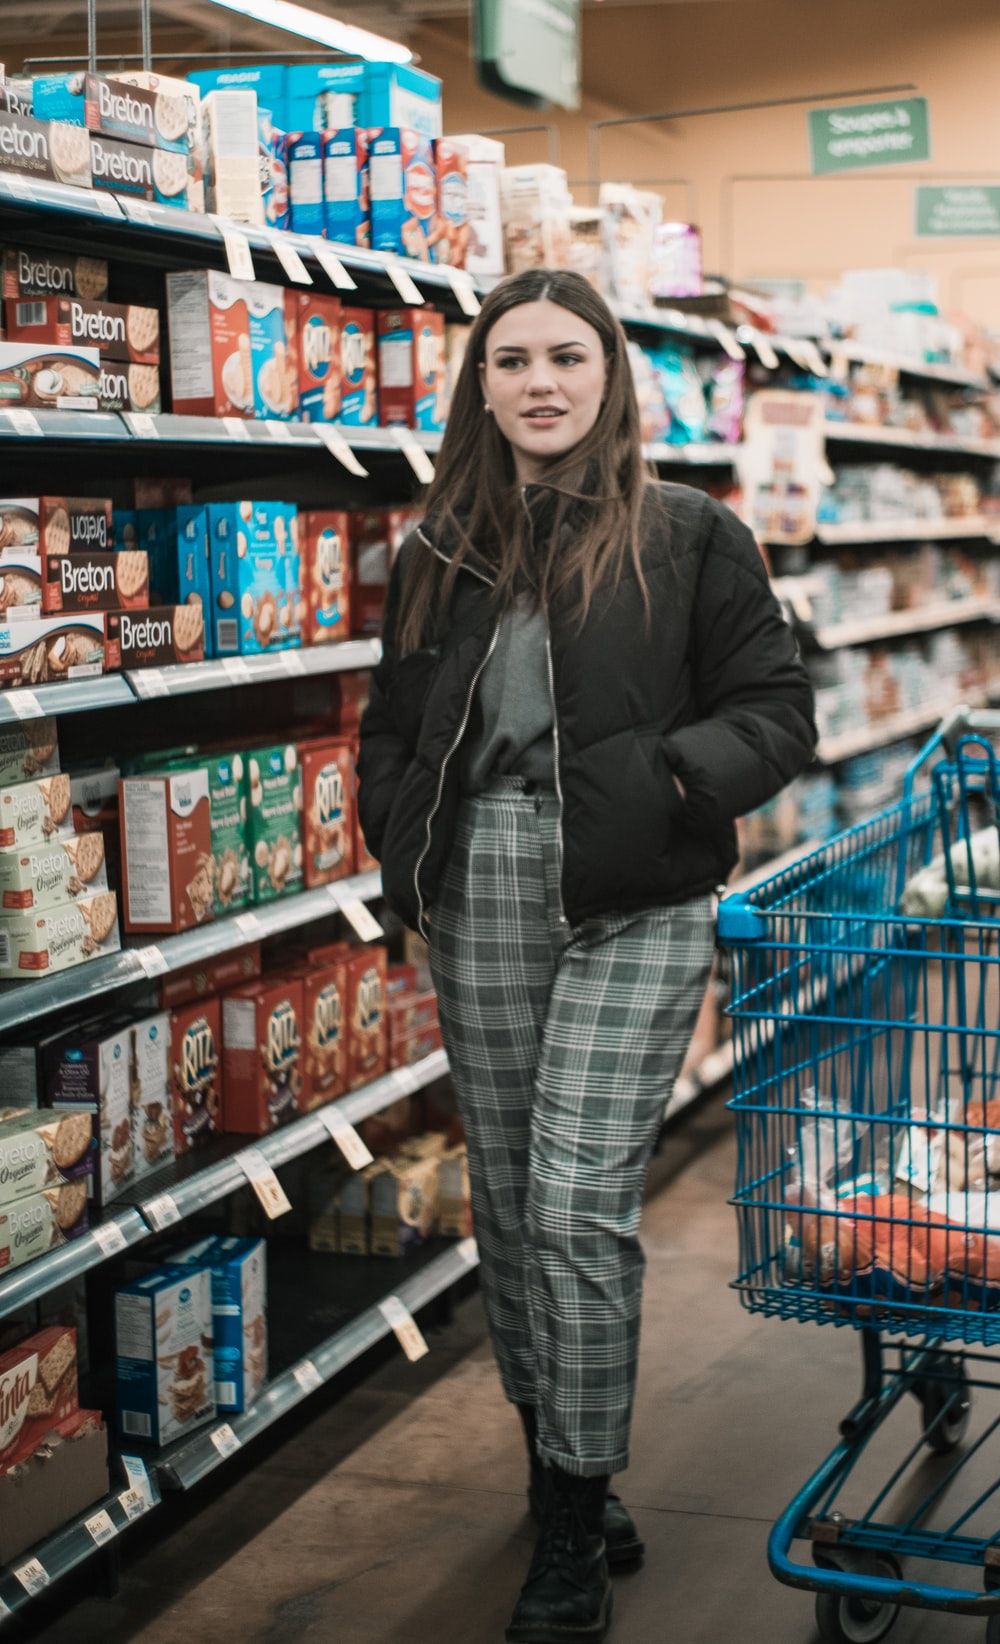 Woman Supermarket Picture. Download Free Image